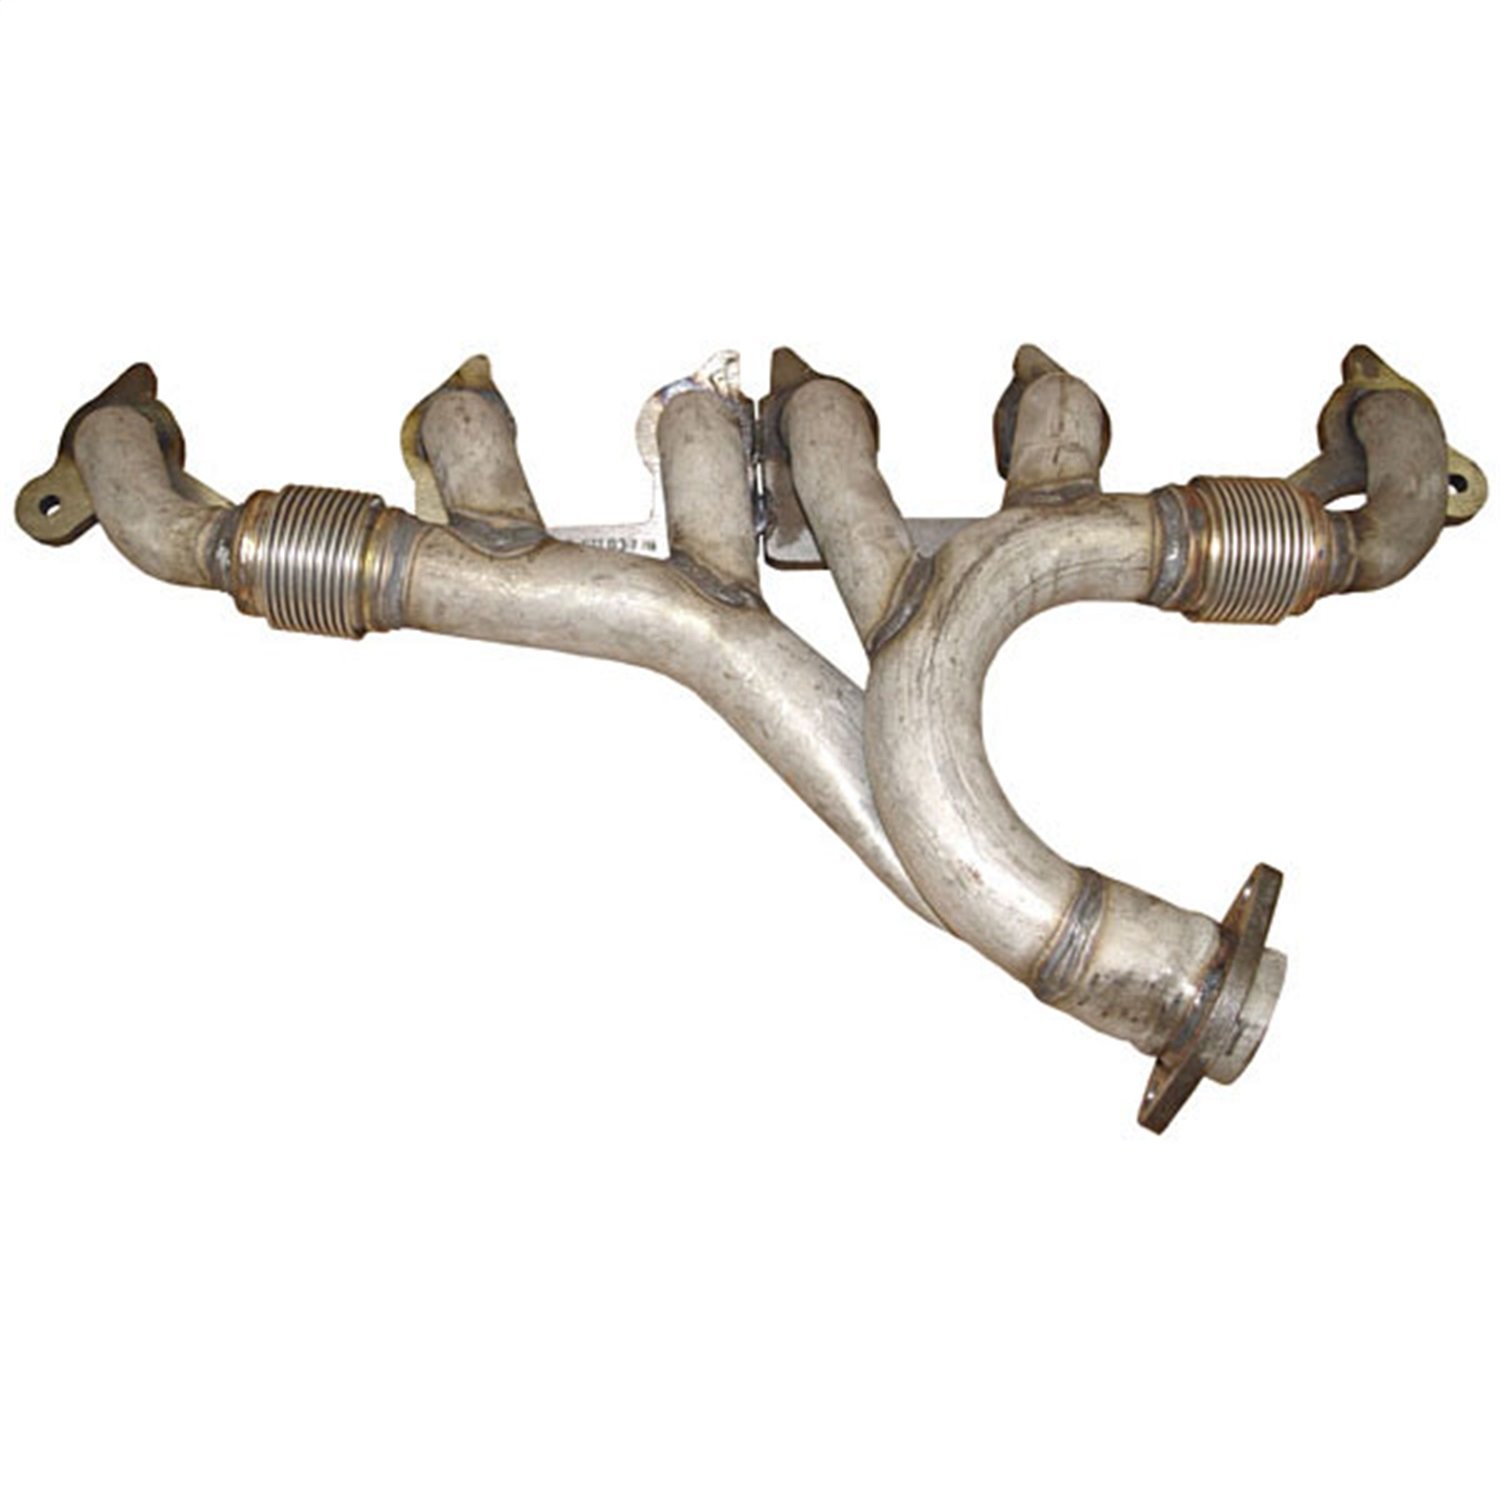 Replacement exhaust manifold kit from Omix-ADA, Fits 91-99